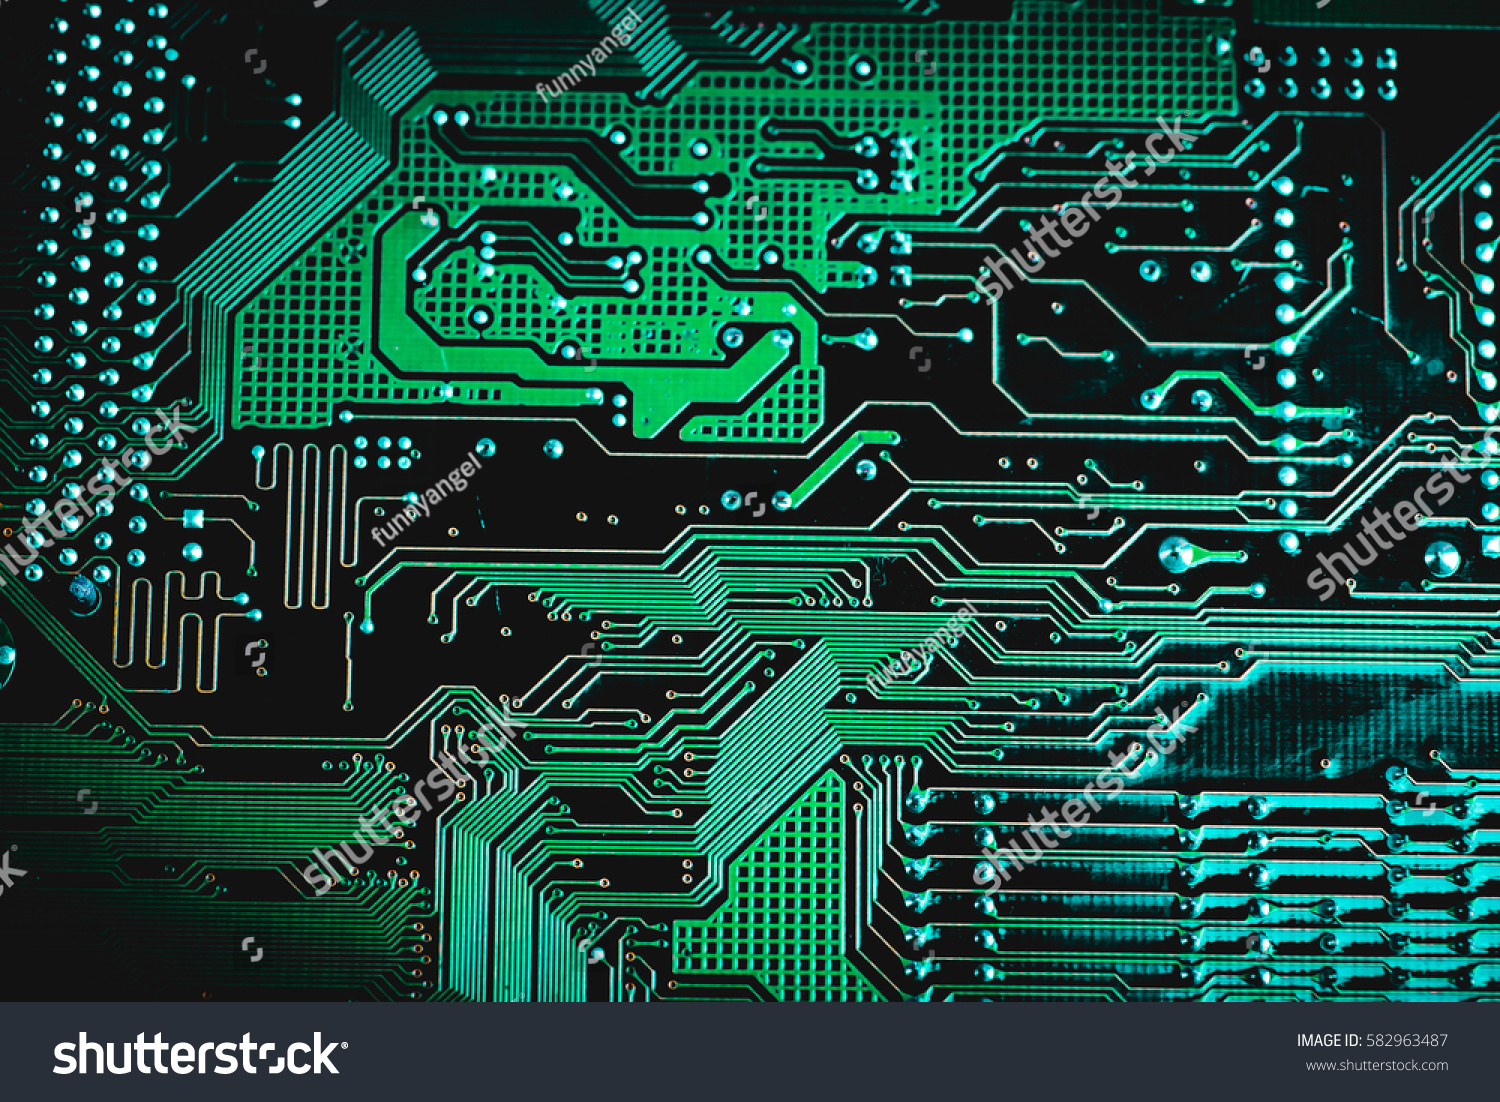 Circuit board. Electronic computer hardware technology. Motherboard digital chip. Tech science background. Integrated communication processor. Information engineering component. Blue, green color. #582963487